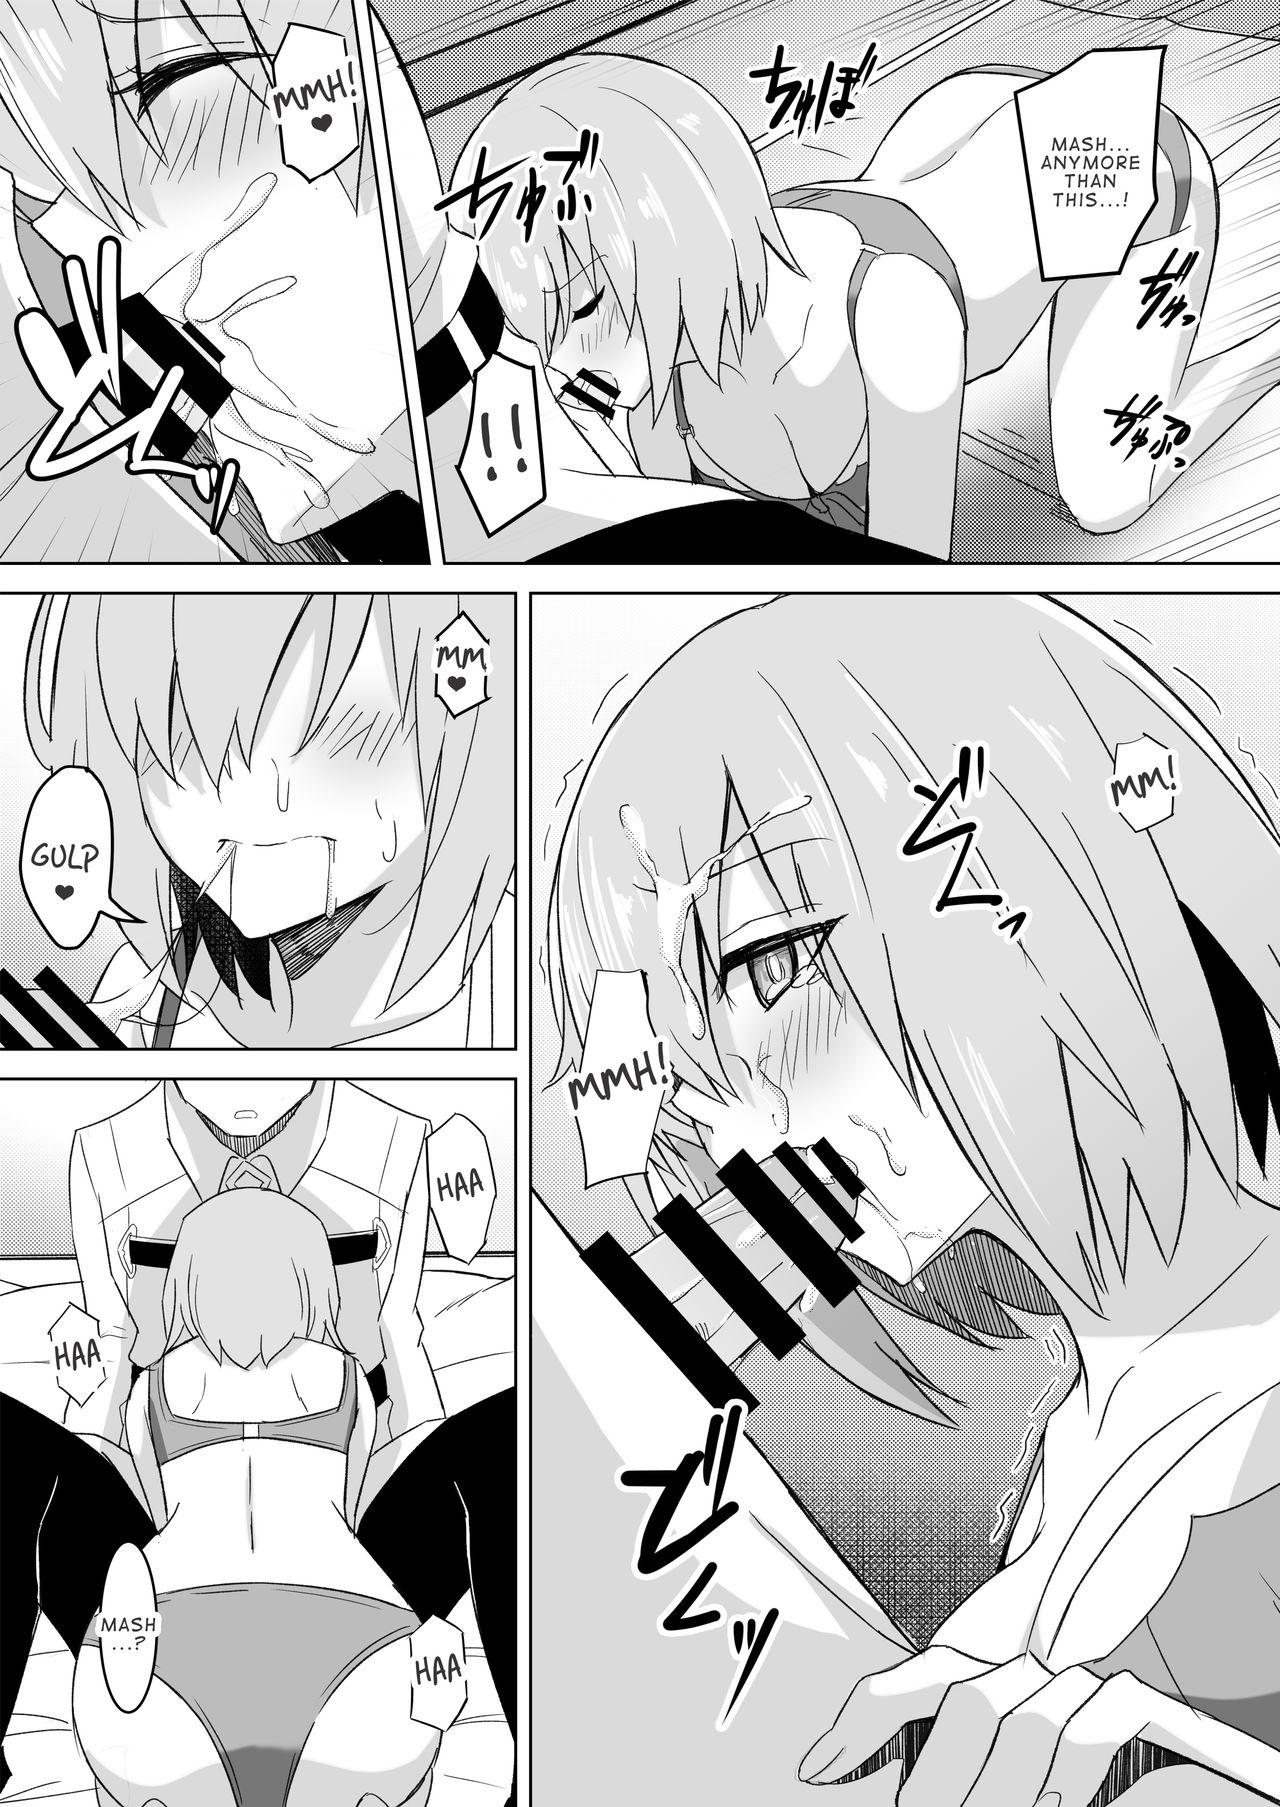 Work Mash Was Jealousy - Fate grand order Blow Job - Page 8